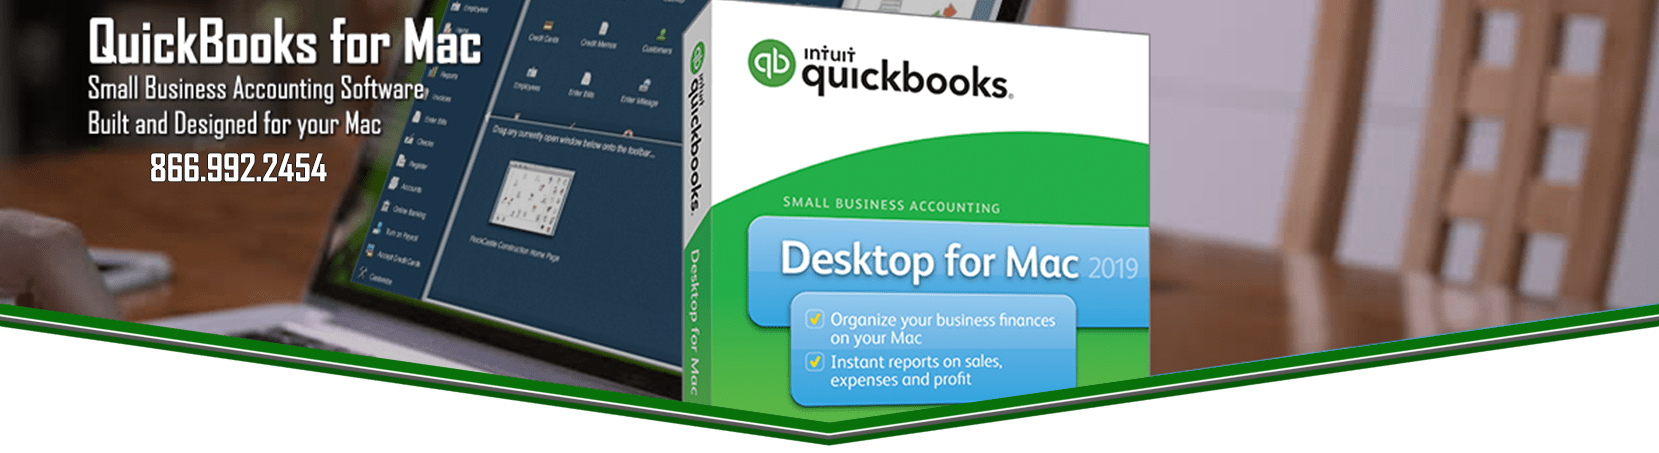 quickbooks 2016 for mac opens slolw